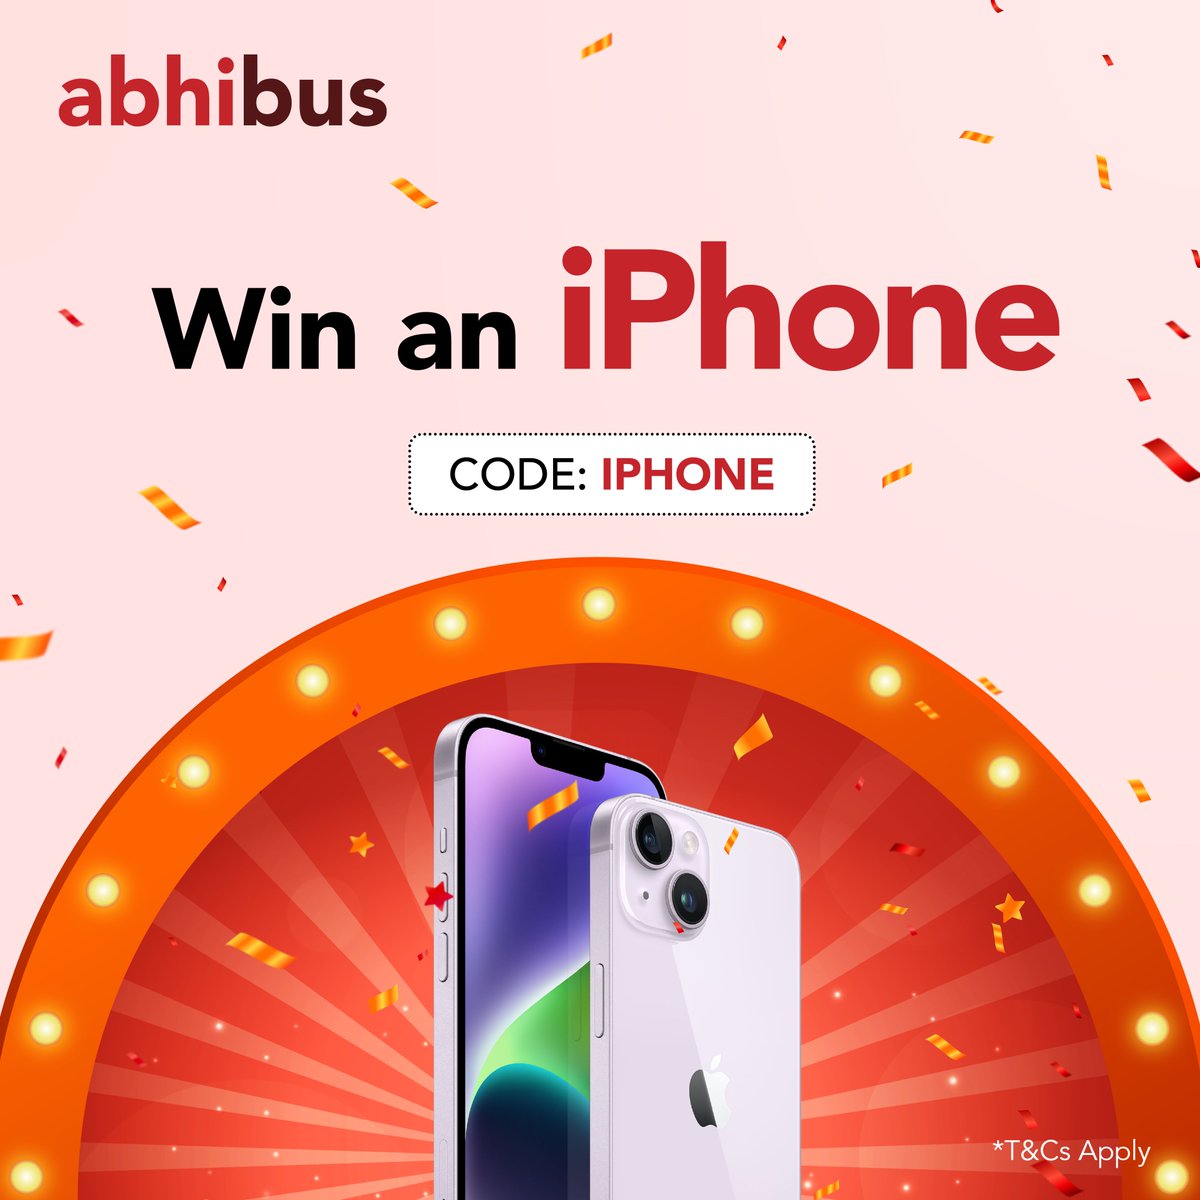 The long weekend is here, so is your chance to Win an iPhone!! We hope you make the best use of both!😁😁 #AbhiBus #ContestAlert #WinAniPhone15